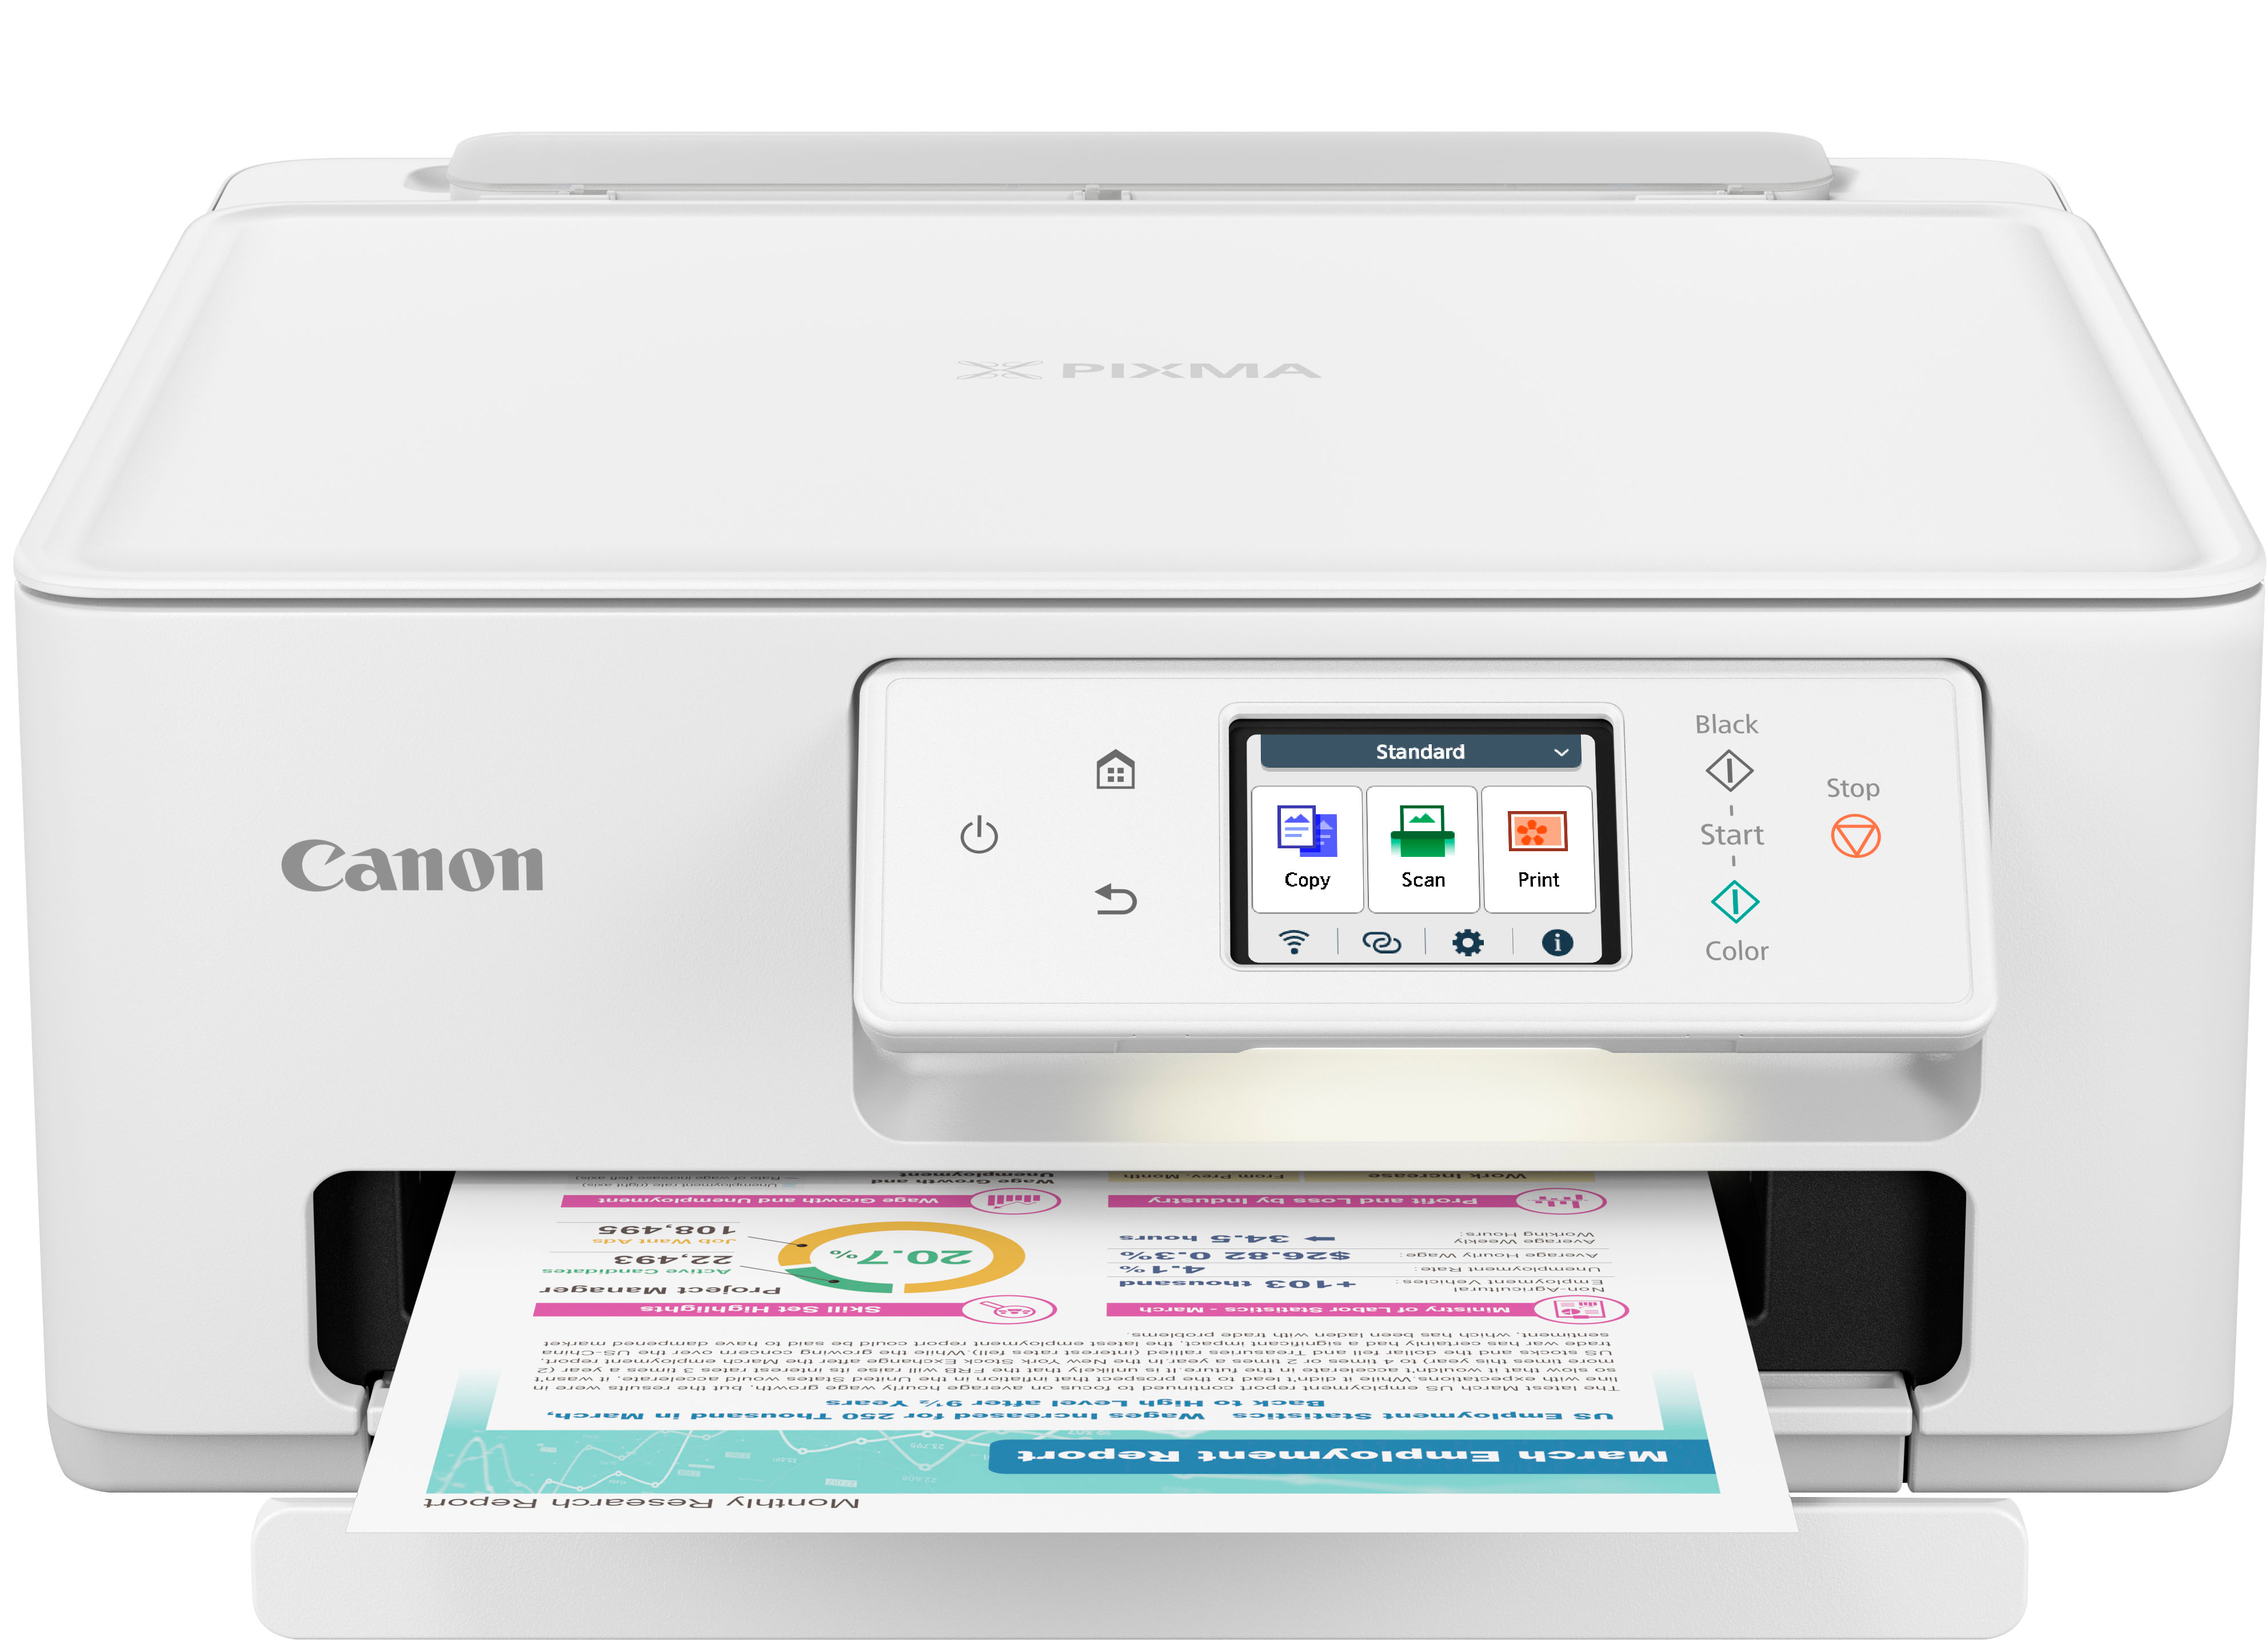 Angle View: Canon - PIXMA TS7720 Wireless All-In-One Inkjet Printer - White